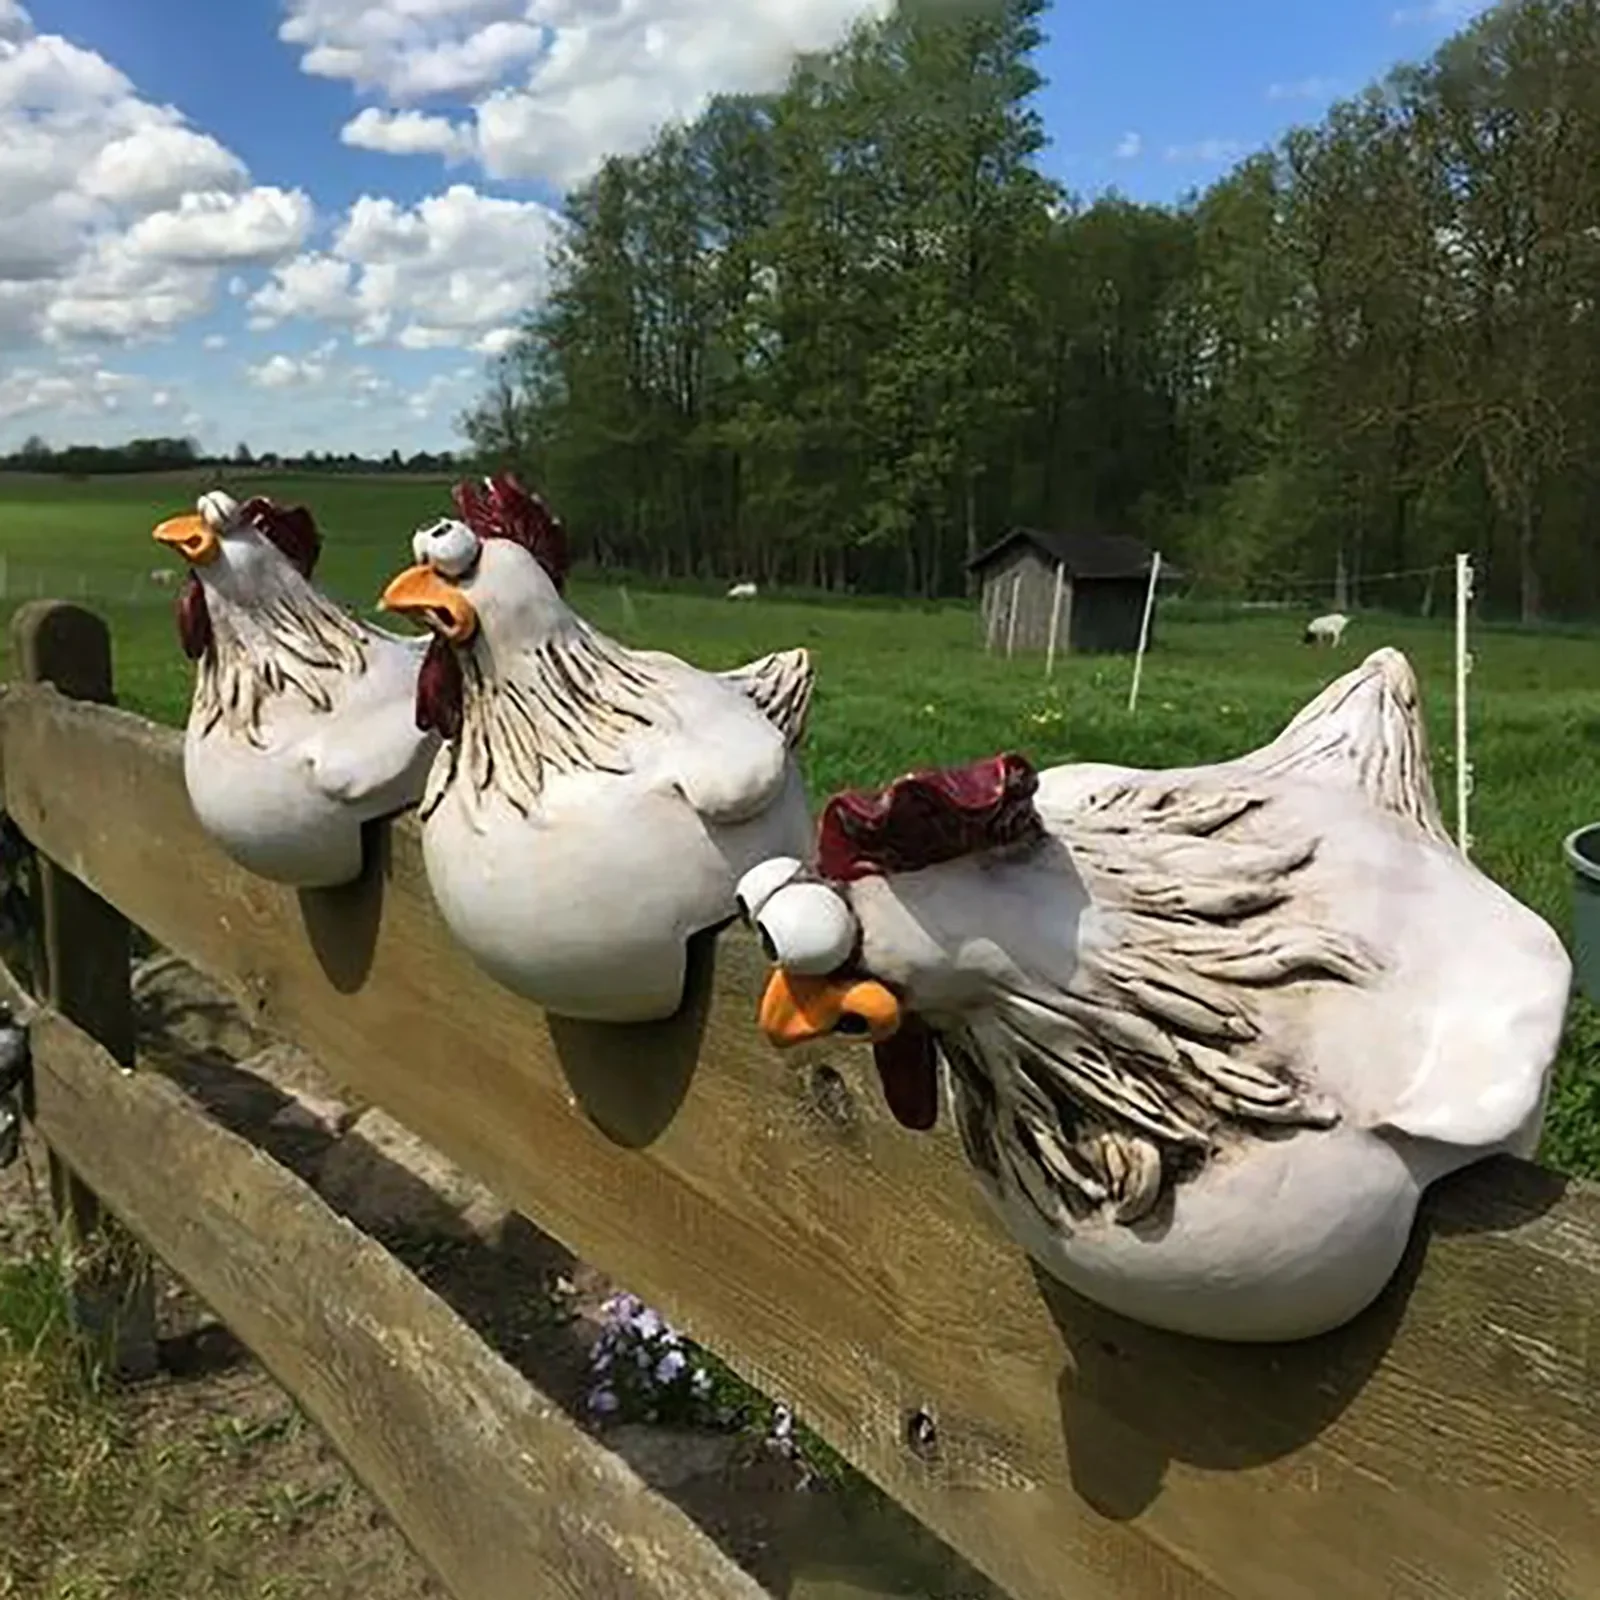 

Chicken Sitting on Fence Decor Garden Statues for Fences Rooster Statues Wall Art Yard Art Sculptures Farm Patio Lawn Decoration